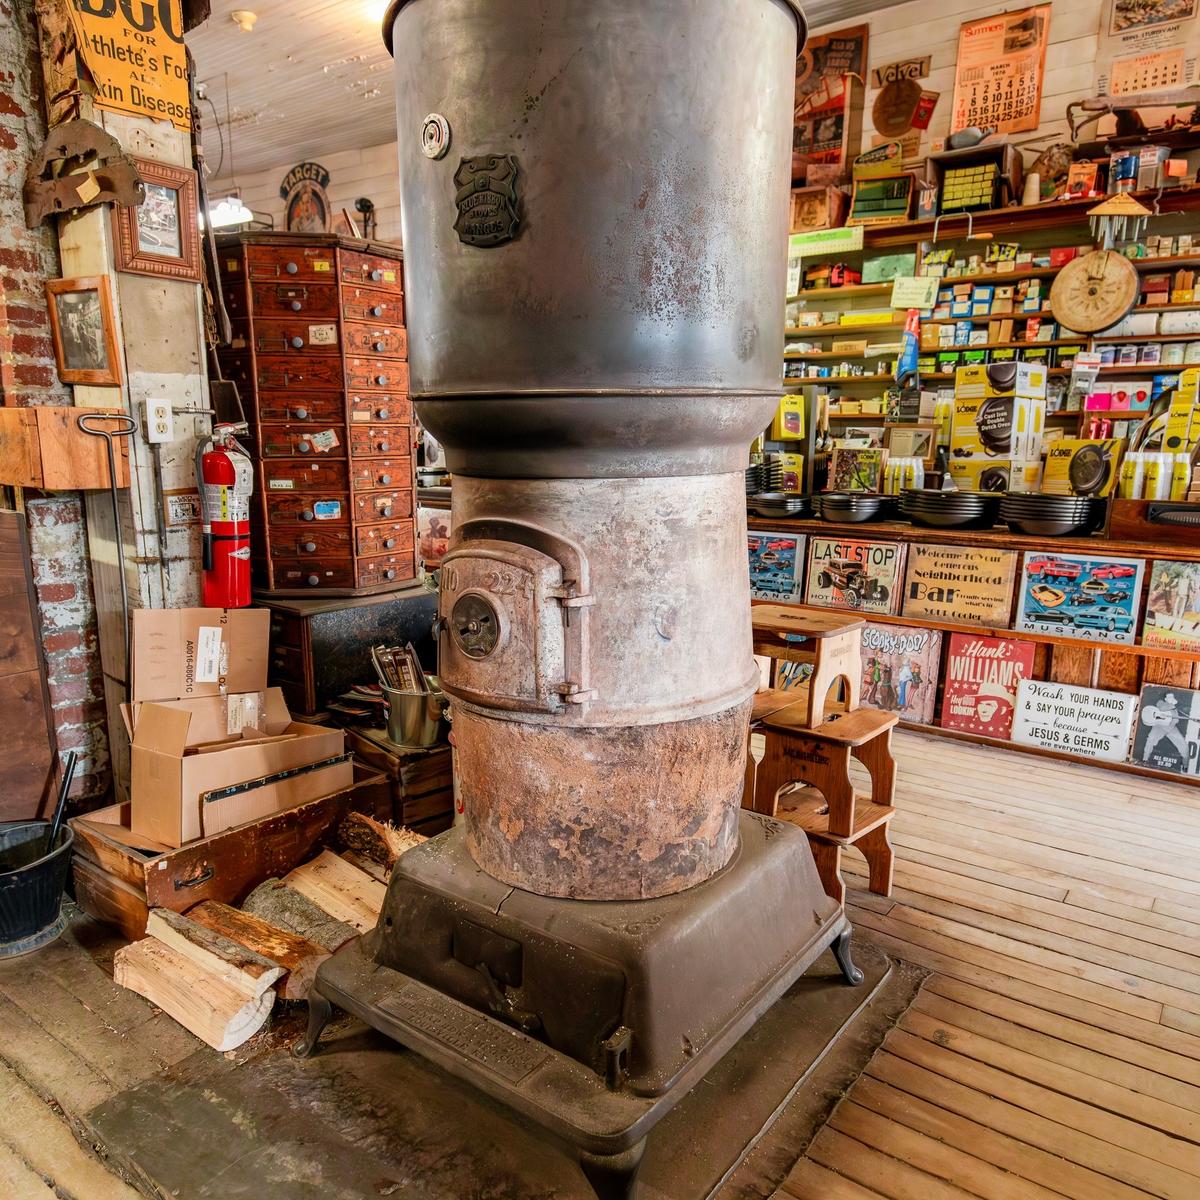 The centrally located wood stove in Mast General Store keeps the 19th-century building toasty during the winter. (Courtesy of Mast General Store)